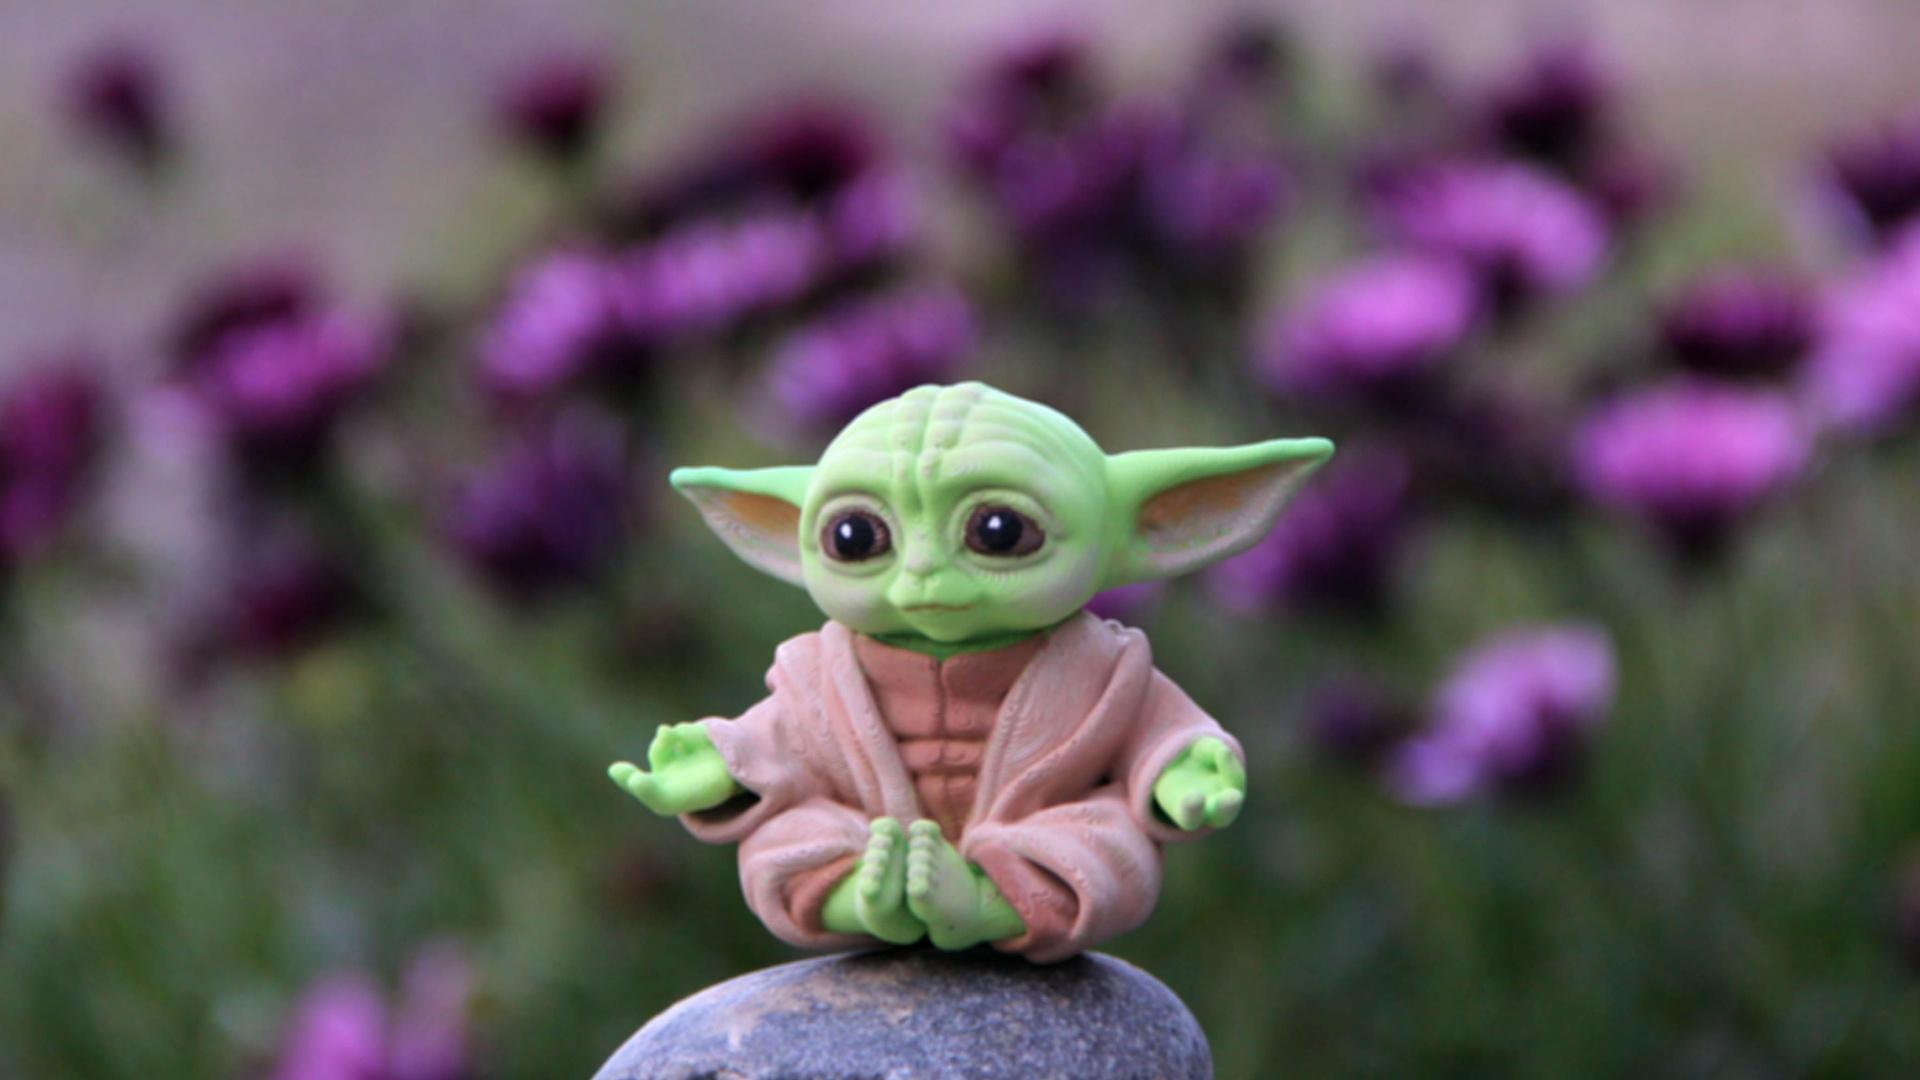 Baby Yoda - Grogu - Printed in Polymaker gradient summer. Nice supports only on back of model if printed the way it automatically loads into slicer. - 3d model